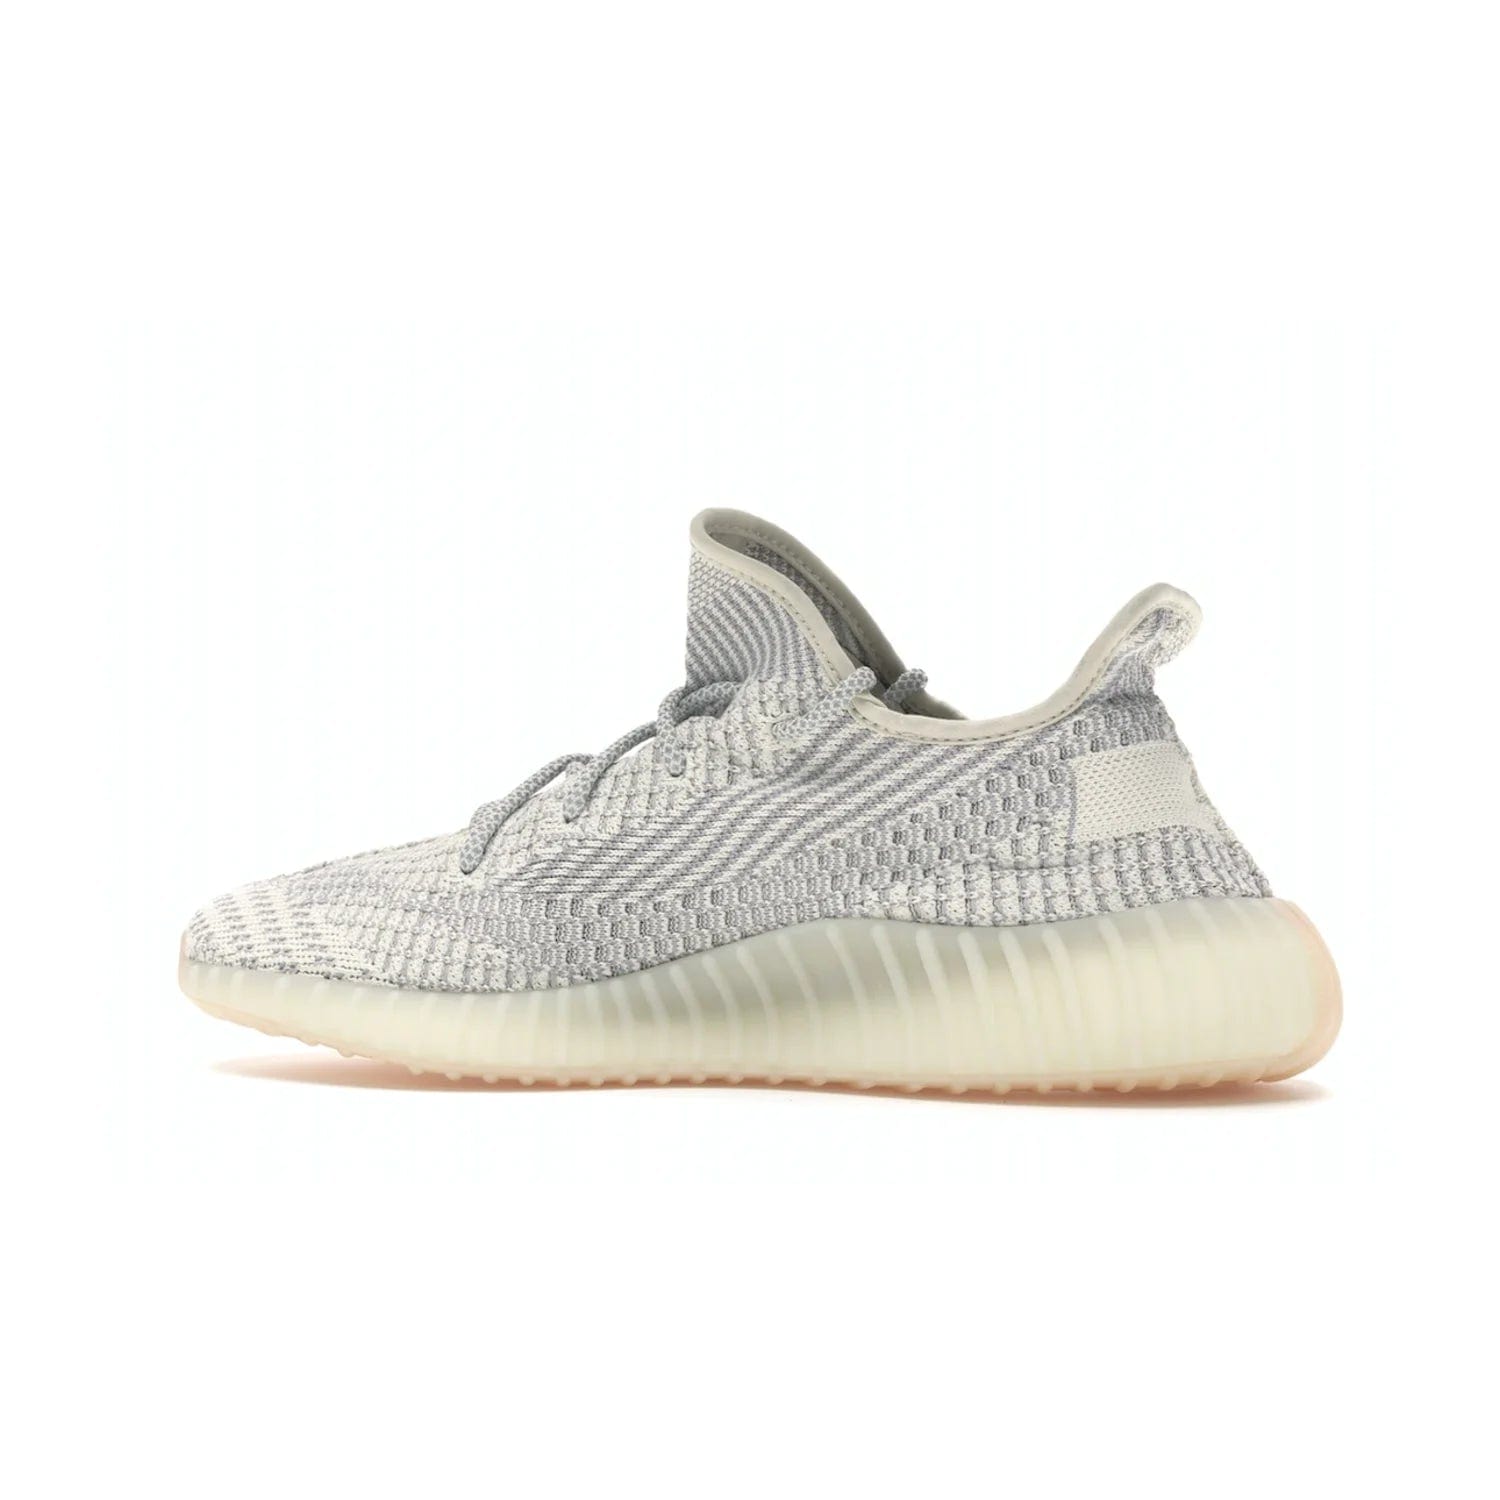 adidas Yeezy Boost 350 V2 Lundmark (Non Reflective) - Image 21 - Only at www.BallersClubKickz.com - Shop the exclusive adidas Yeezy Boost 350 V2 Lundmark with a subtle summer color, mesh upper, white-to-cream transitional midsole, light tan outsole, and pink middle stripe. Comfort and style come together in this perfect summer 350 V2. Released on July 11, 2019.